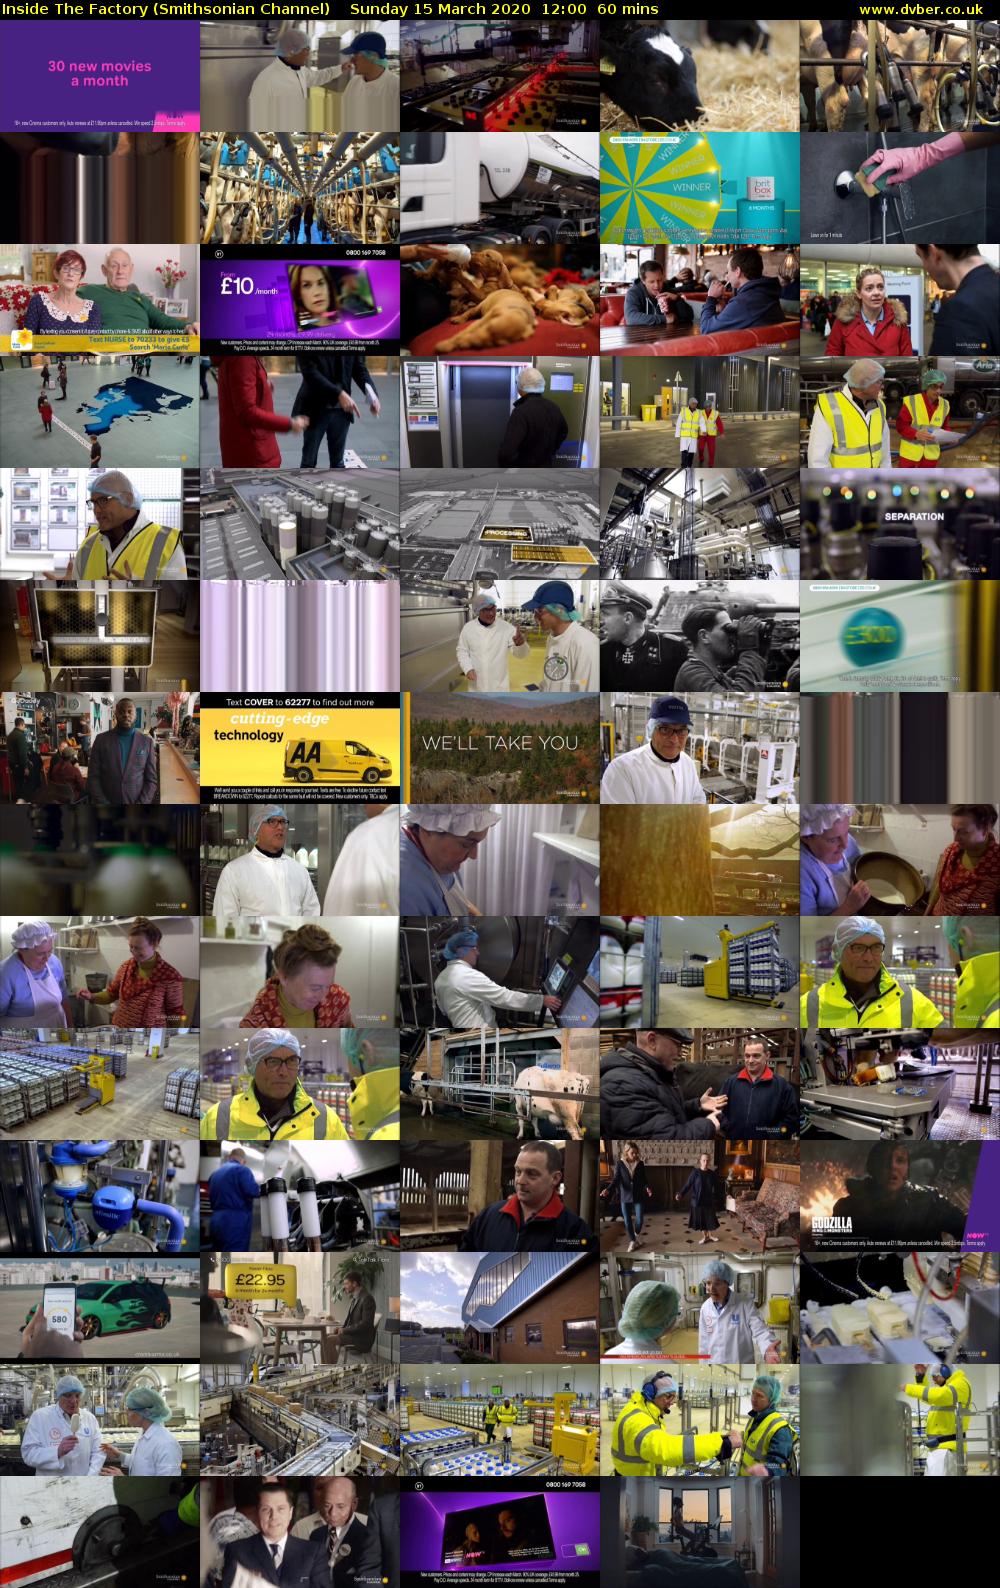 Inside The Factory (Smithsonian Channel) Sunday 15 March 2020 12:00 - 13:00